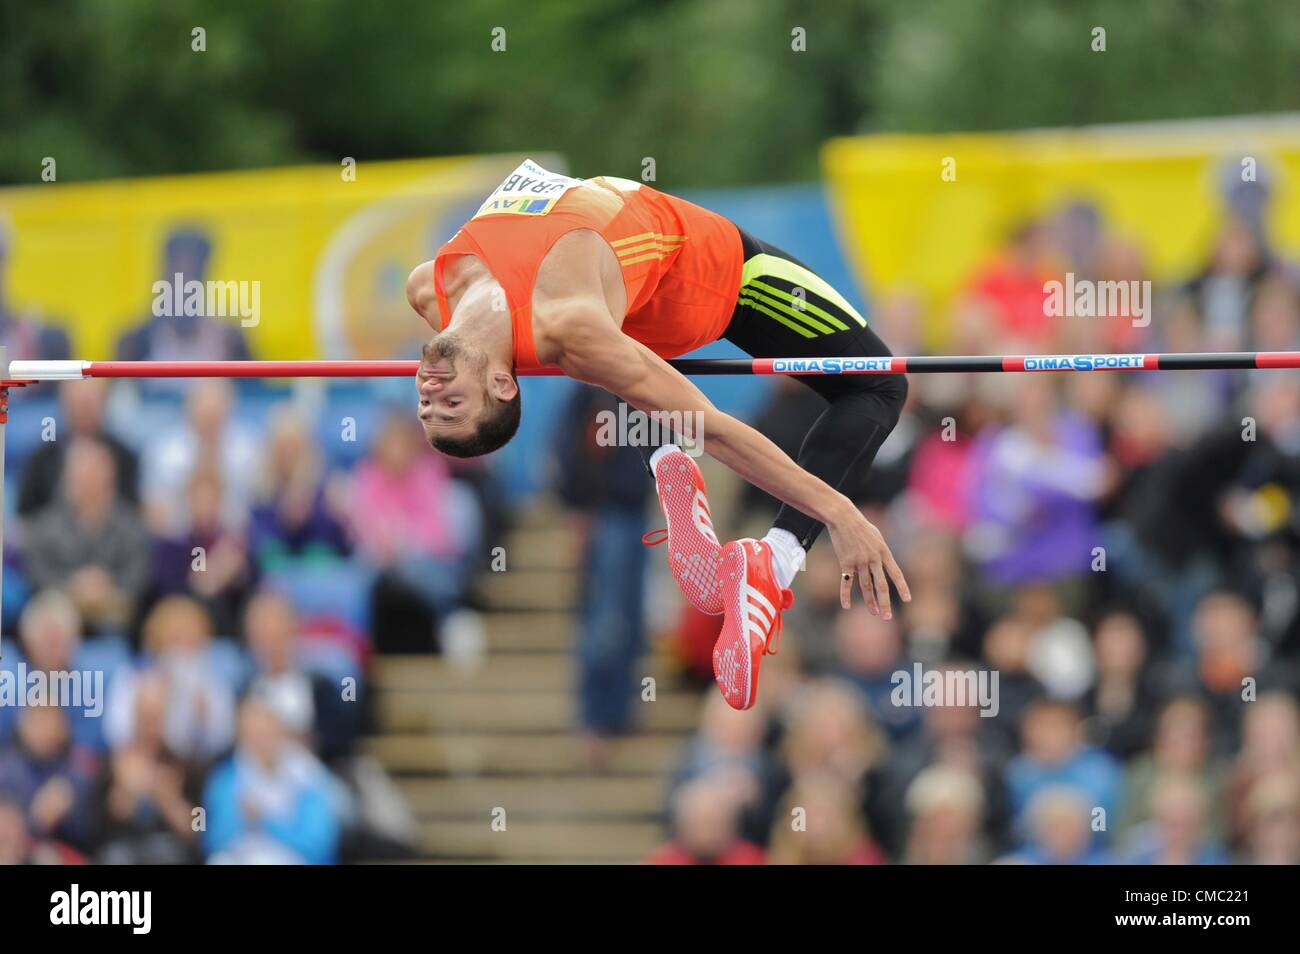 14.07.2012 London ENGLAND Mens High Jump, Robbie Grabarz in action during the Aviva Grand Prix at the Crystal Palace Stadium. Stock Photo